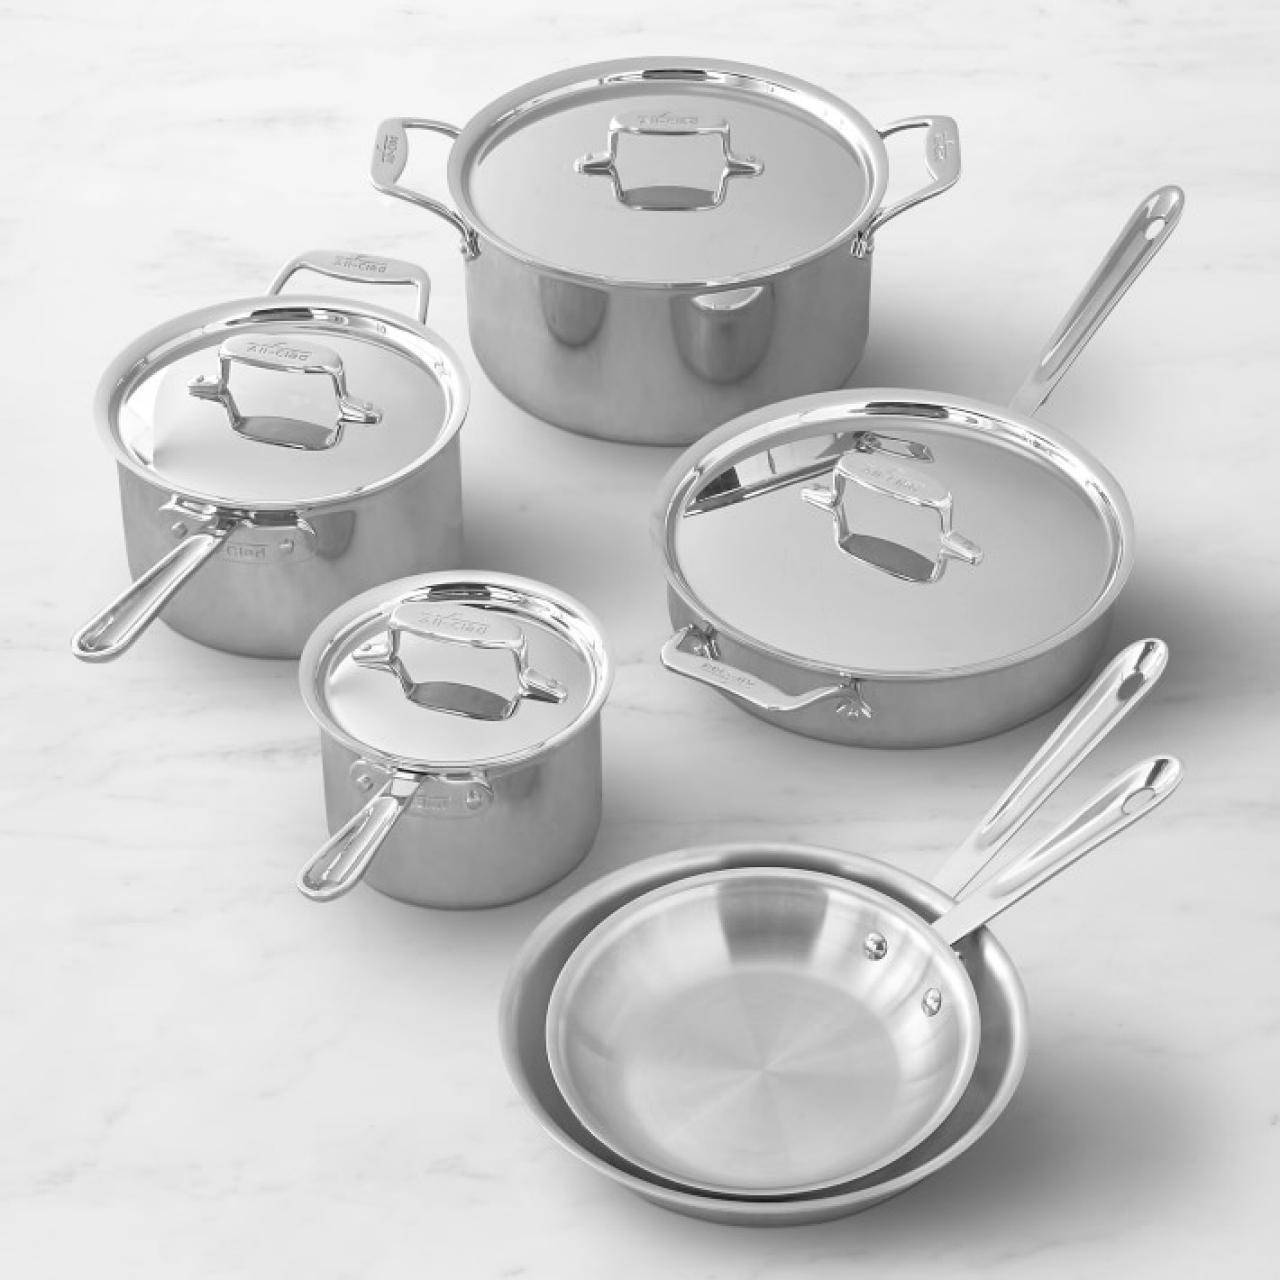 All-Clad's chef's favorite cookware set is 60% off right now